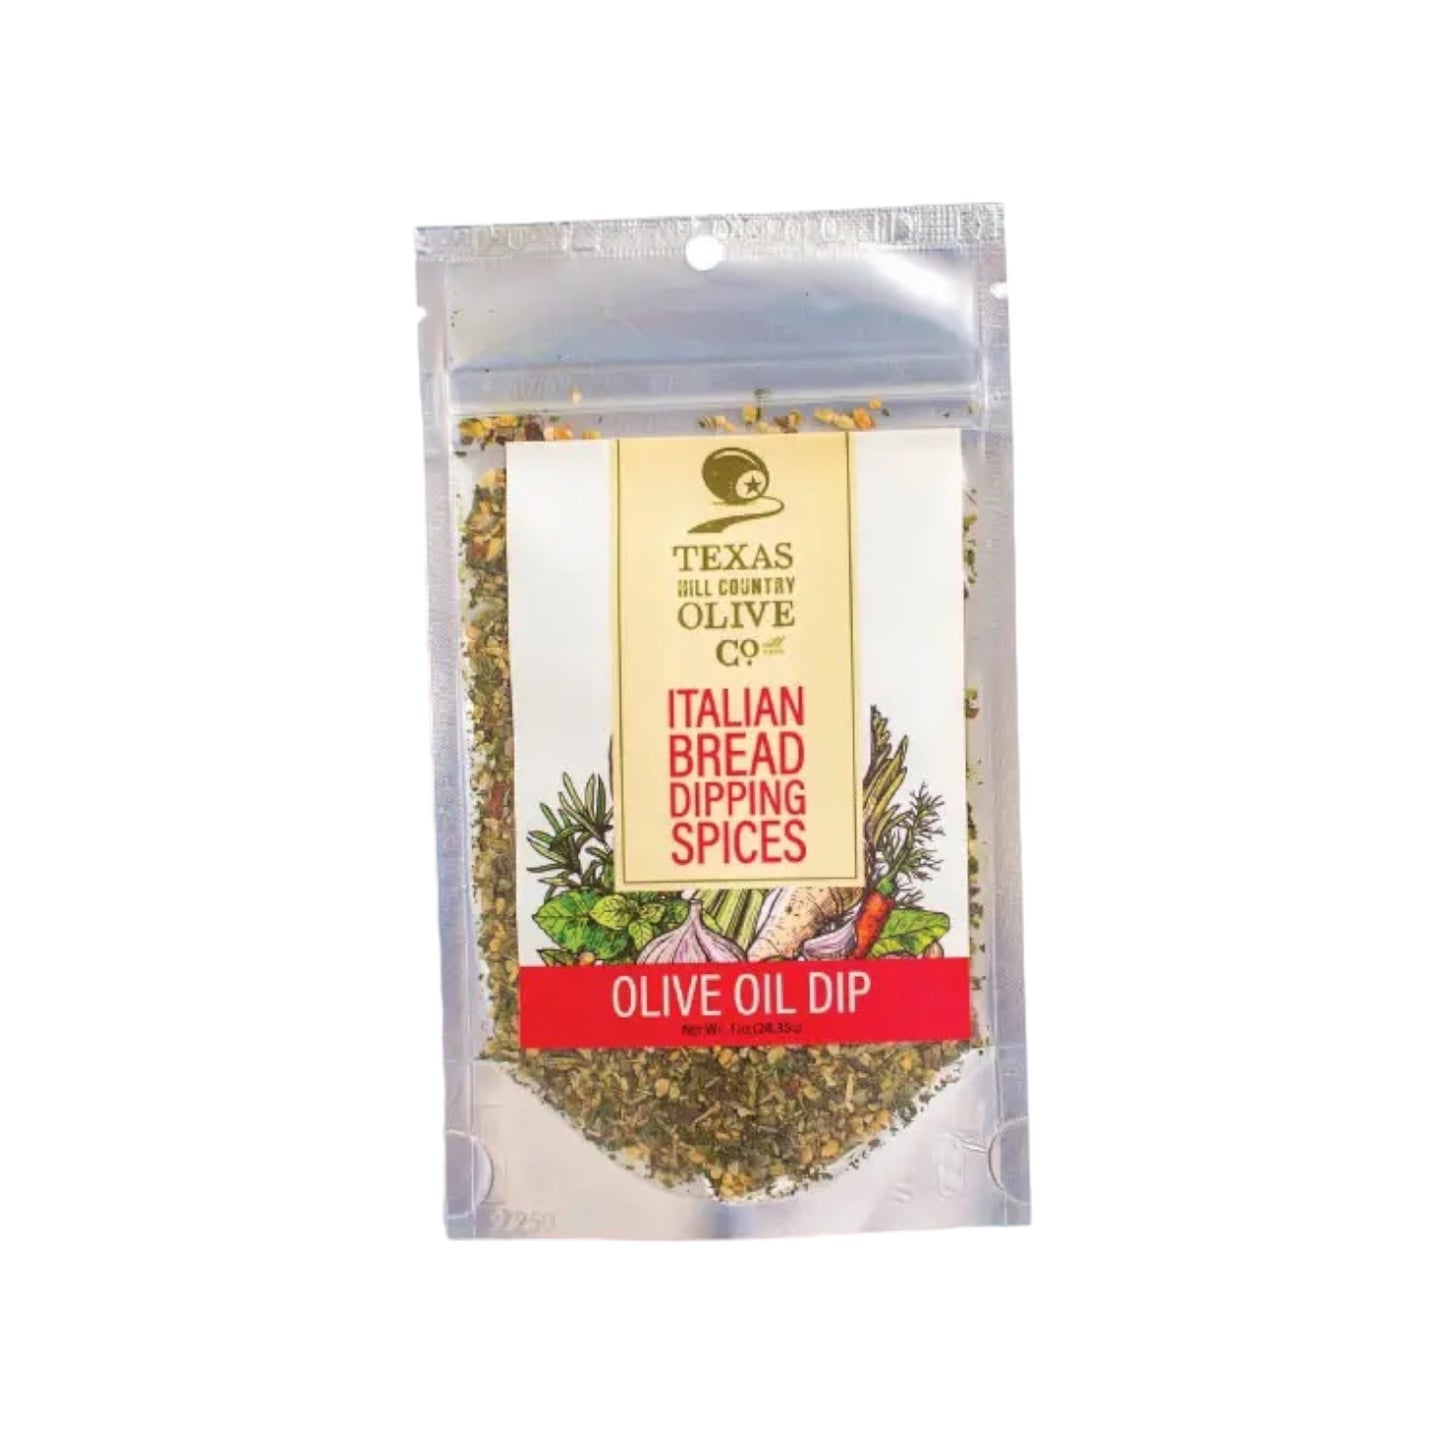 Italian Bread Dipping Spices by Texas Hill Country Olive Oil Co. 